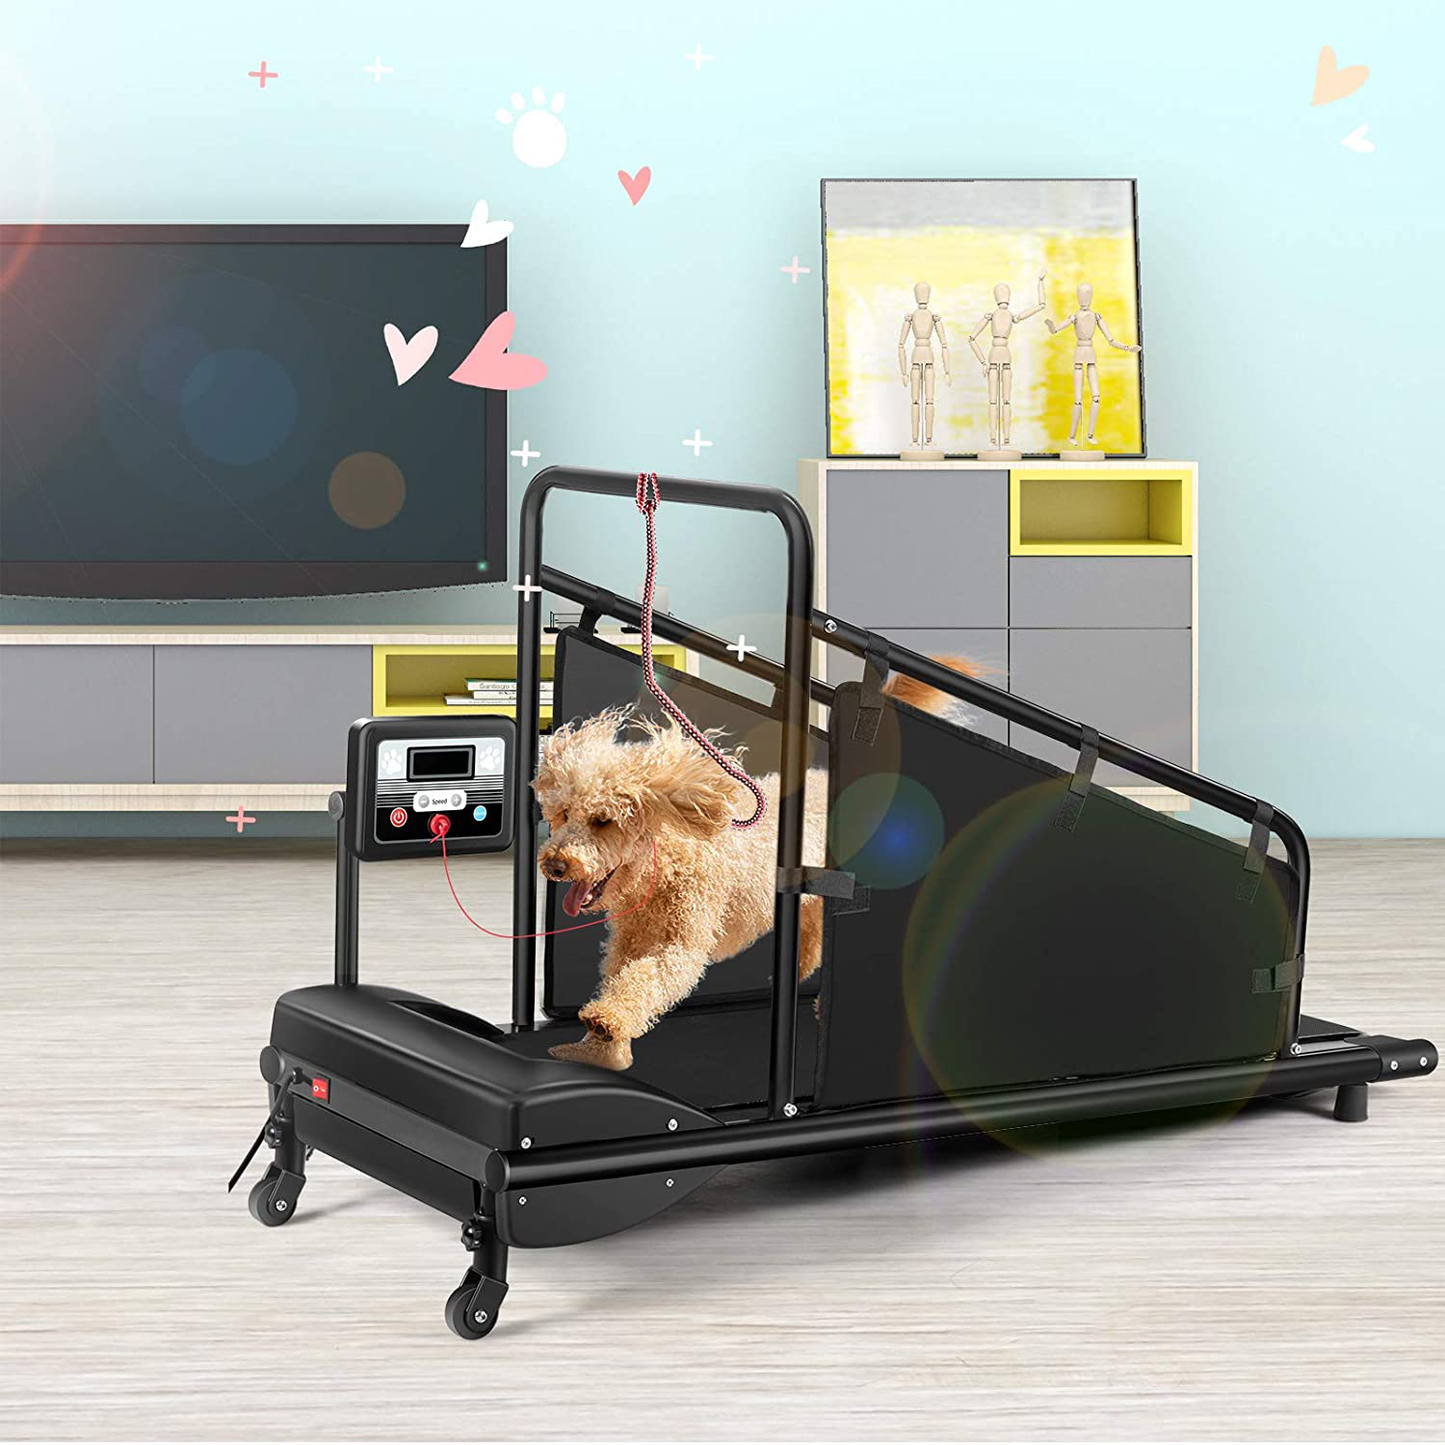 GYMAX Dog Treadmill, Small/Medium Dog Running Machine with LCD Display & Remote Control, Adjustable Speed Pet Treadmill for Pet up to 200LBS Animals & Pet Supplies > Pet Supplies > Dog Supplies > Dog Treadmills GYMAX   